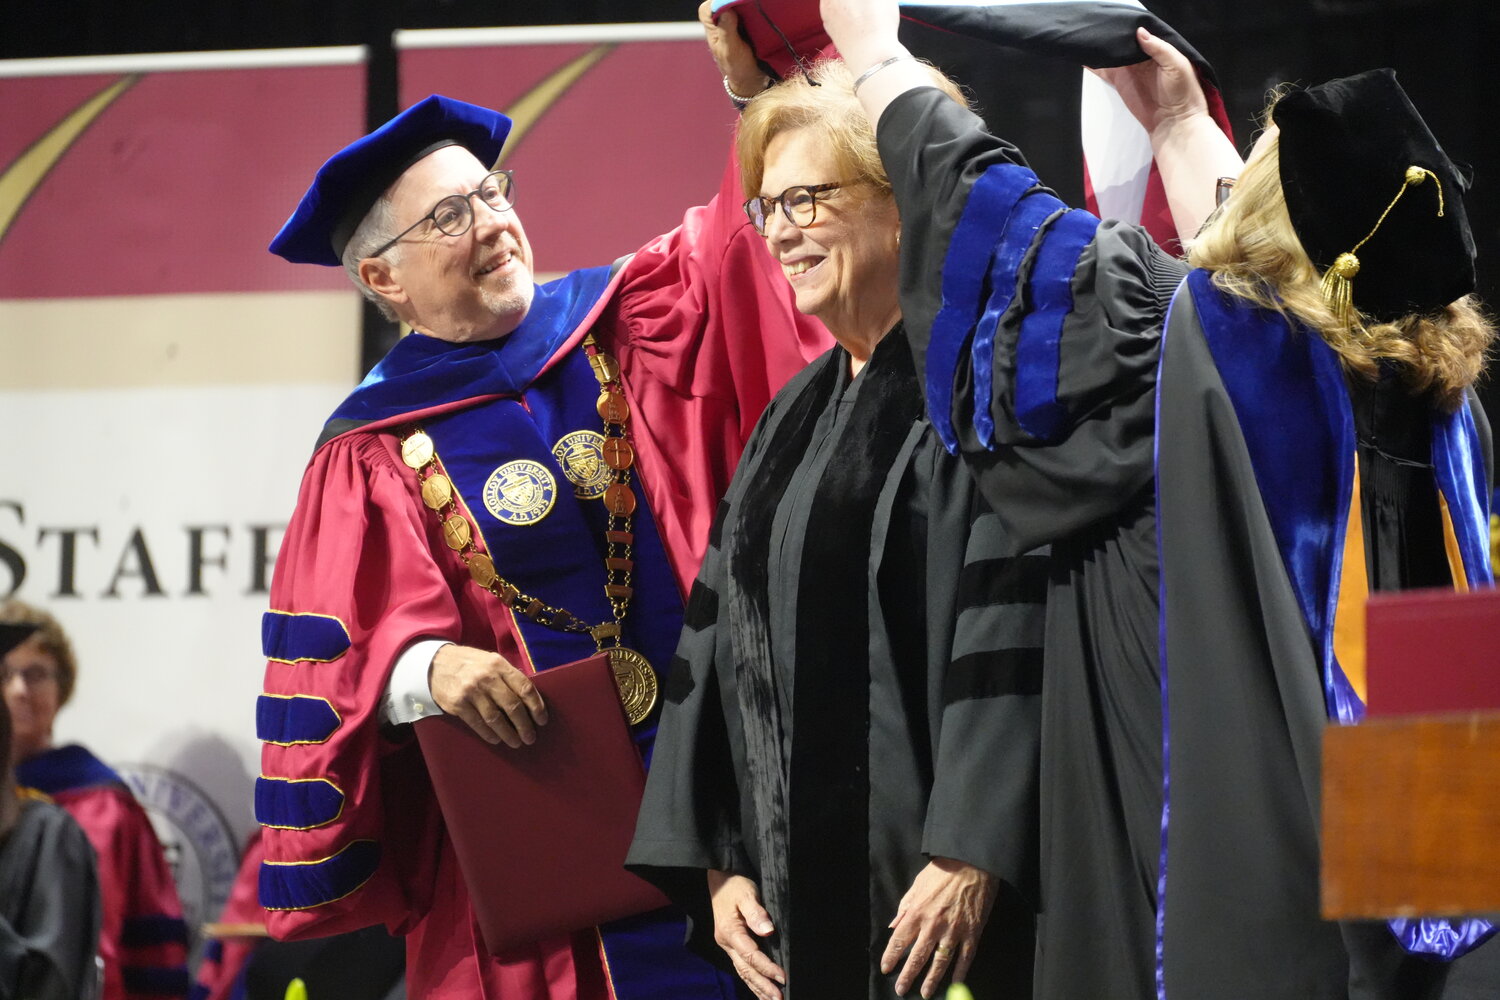 Sister Donna Markham, president and chief executive officer of Catholic Charities USA, was presented an honorary Doctor of Humane Letters degree for her work during her 40-year career.